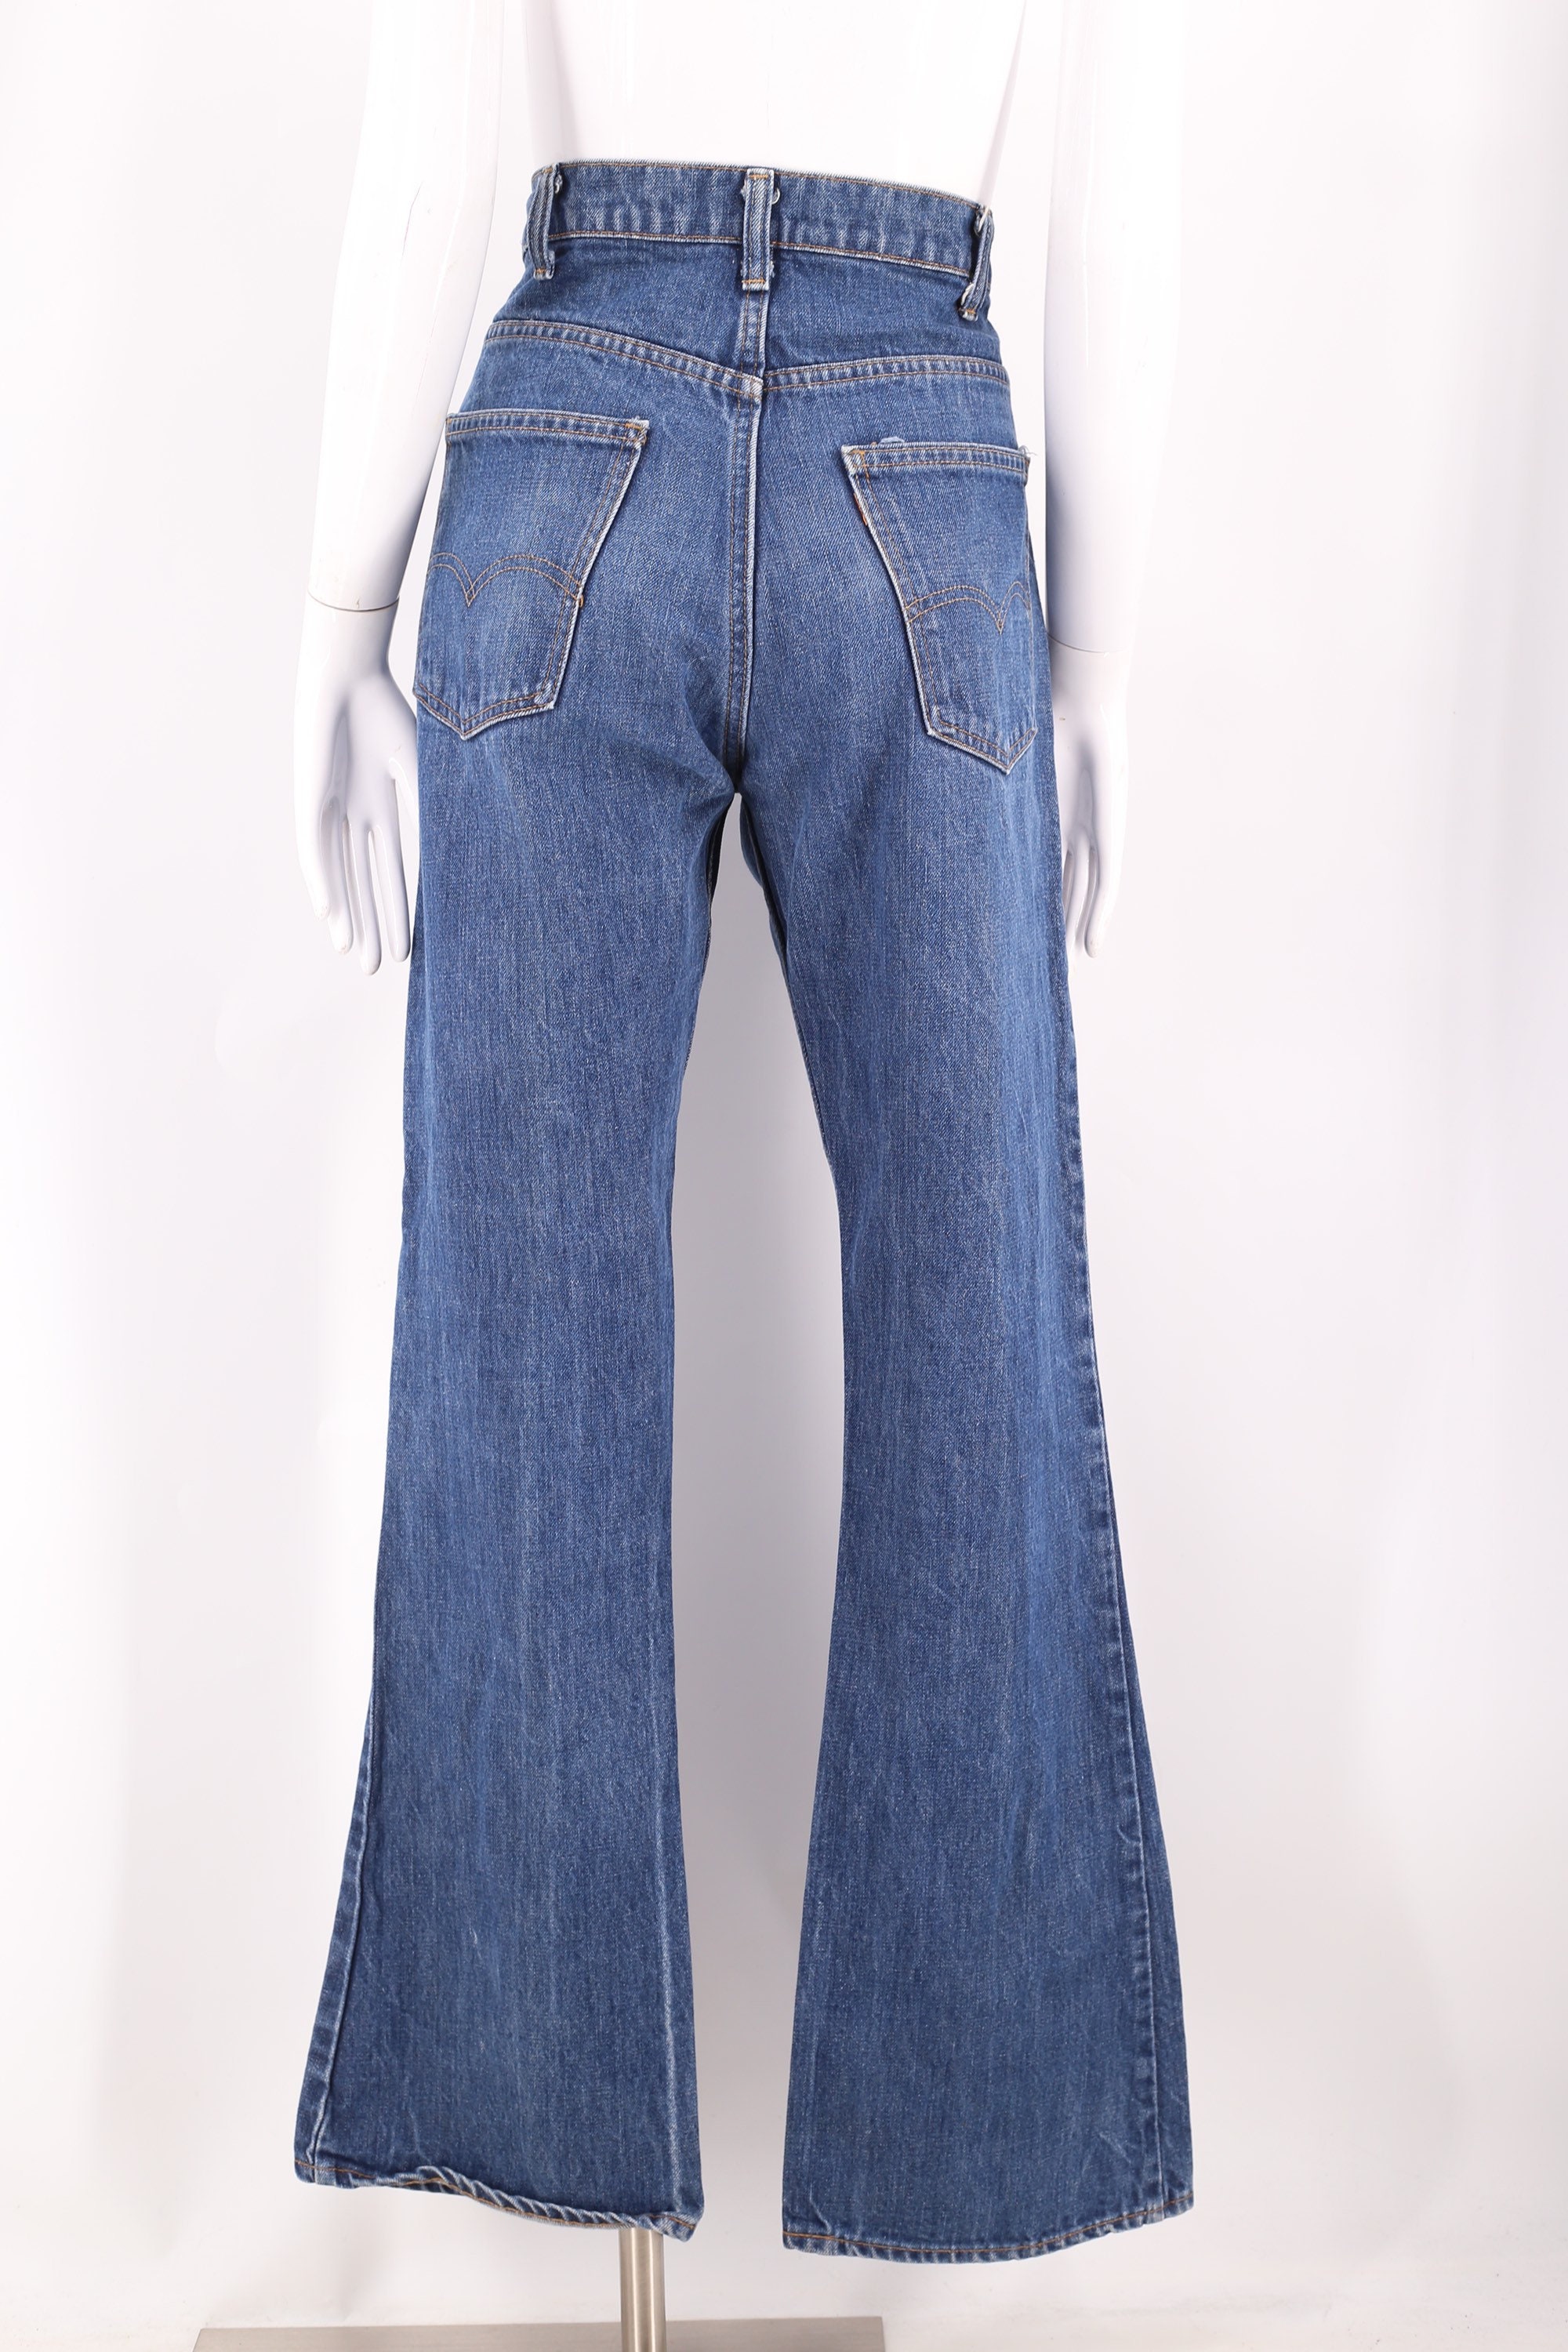 70s 80s LEVIS 517 high waist snap front bell bottom jeans 32 / vintage ...